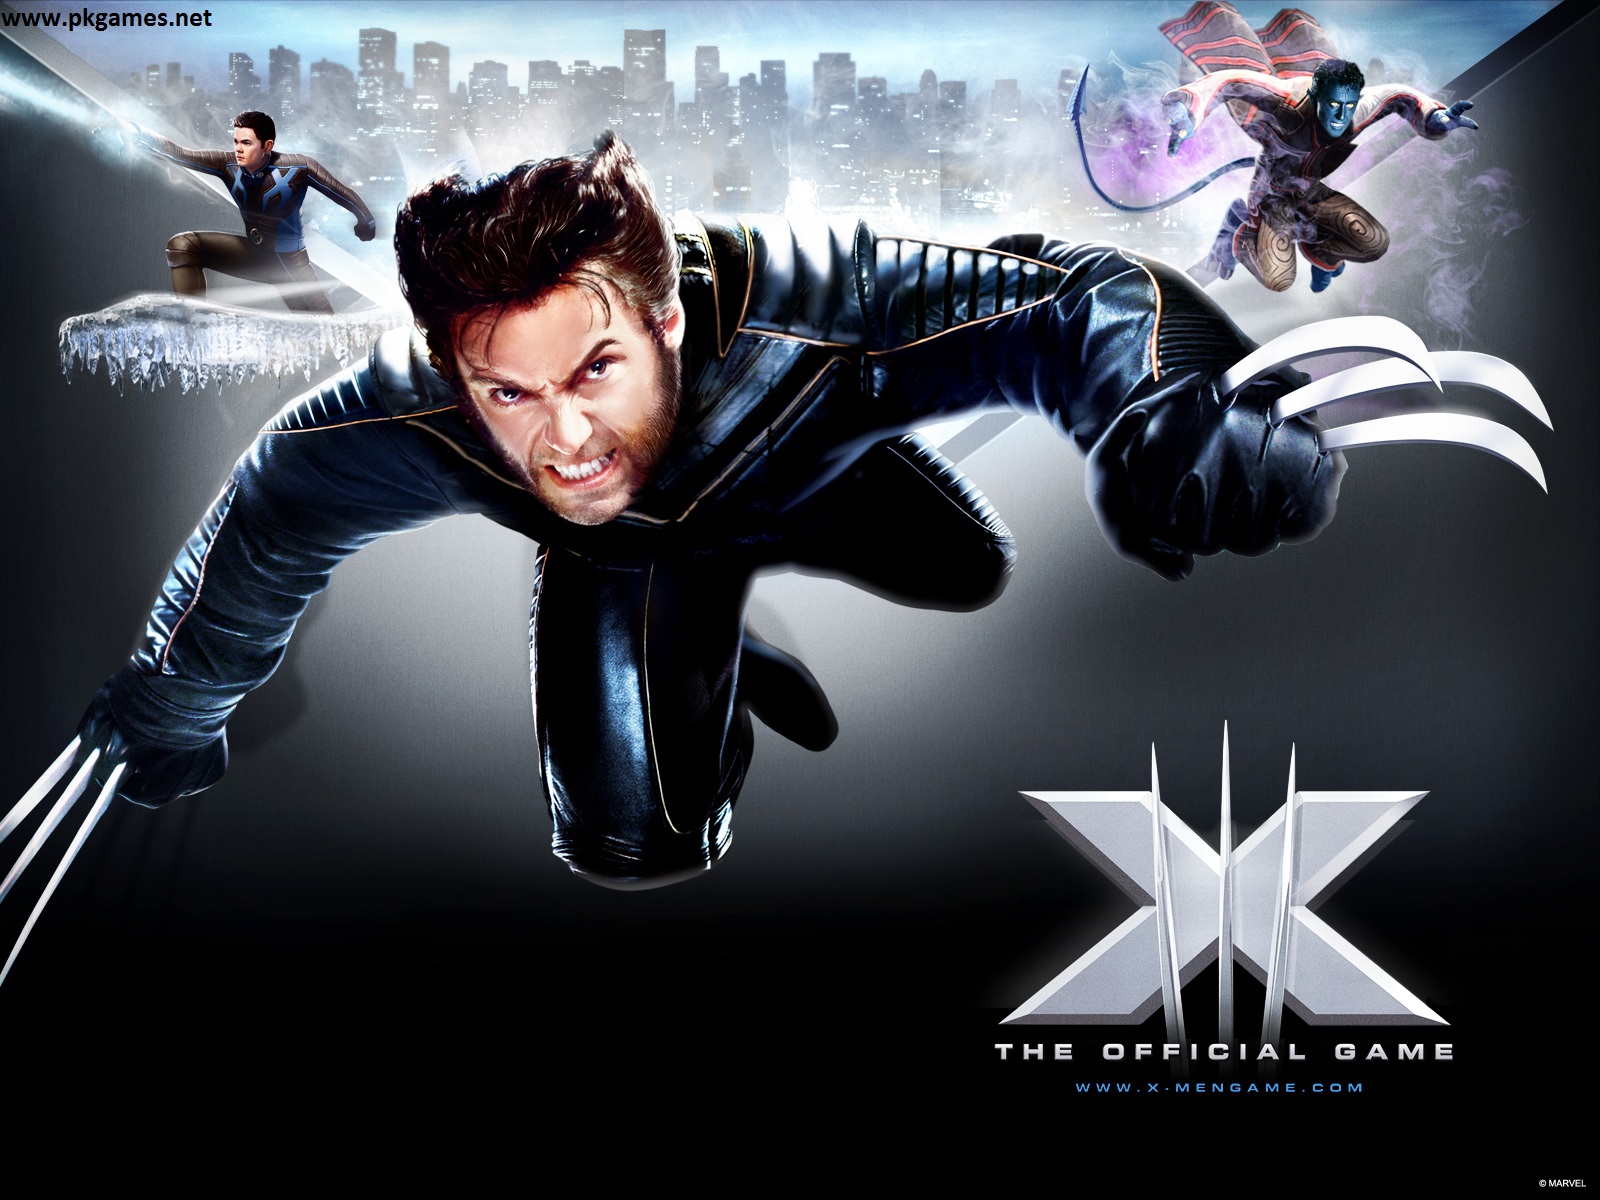 X-men games free download for pc